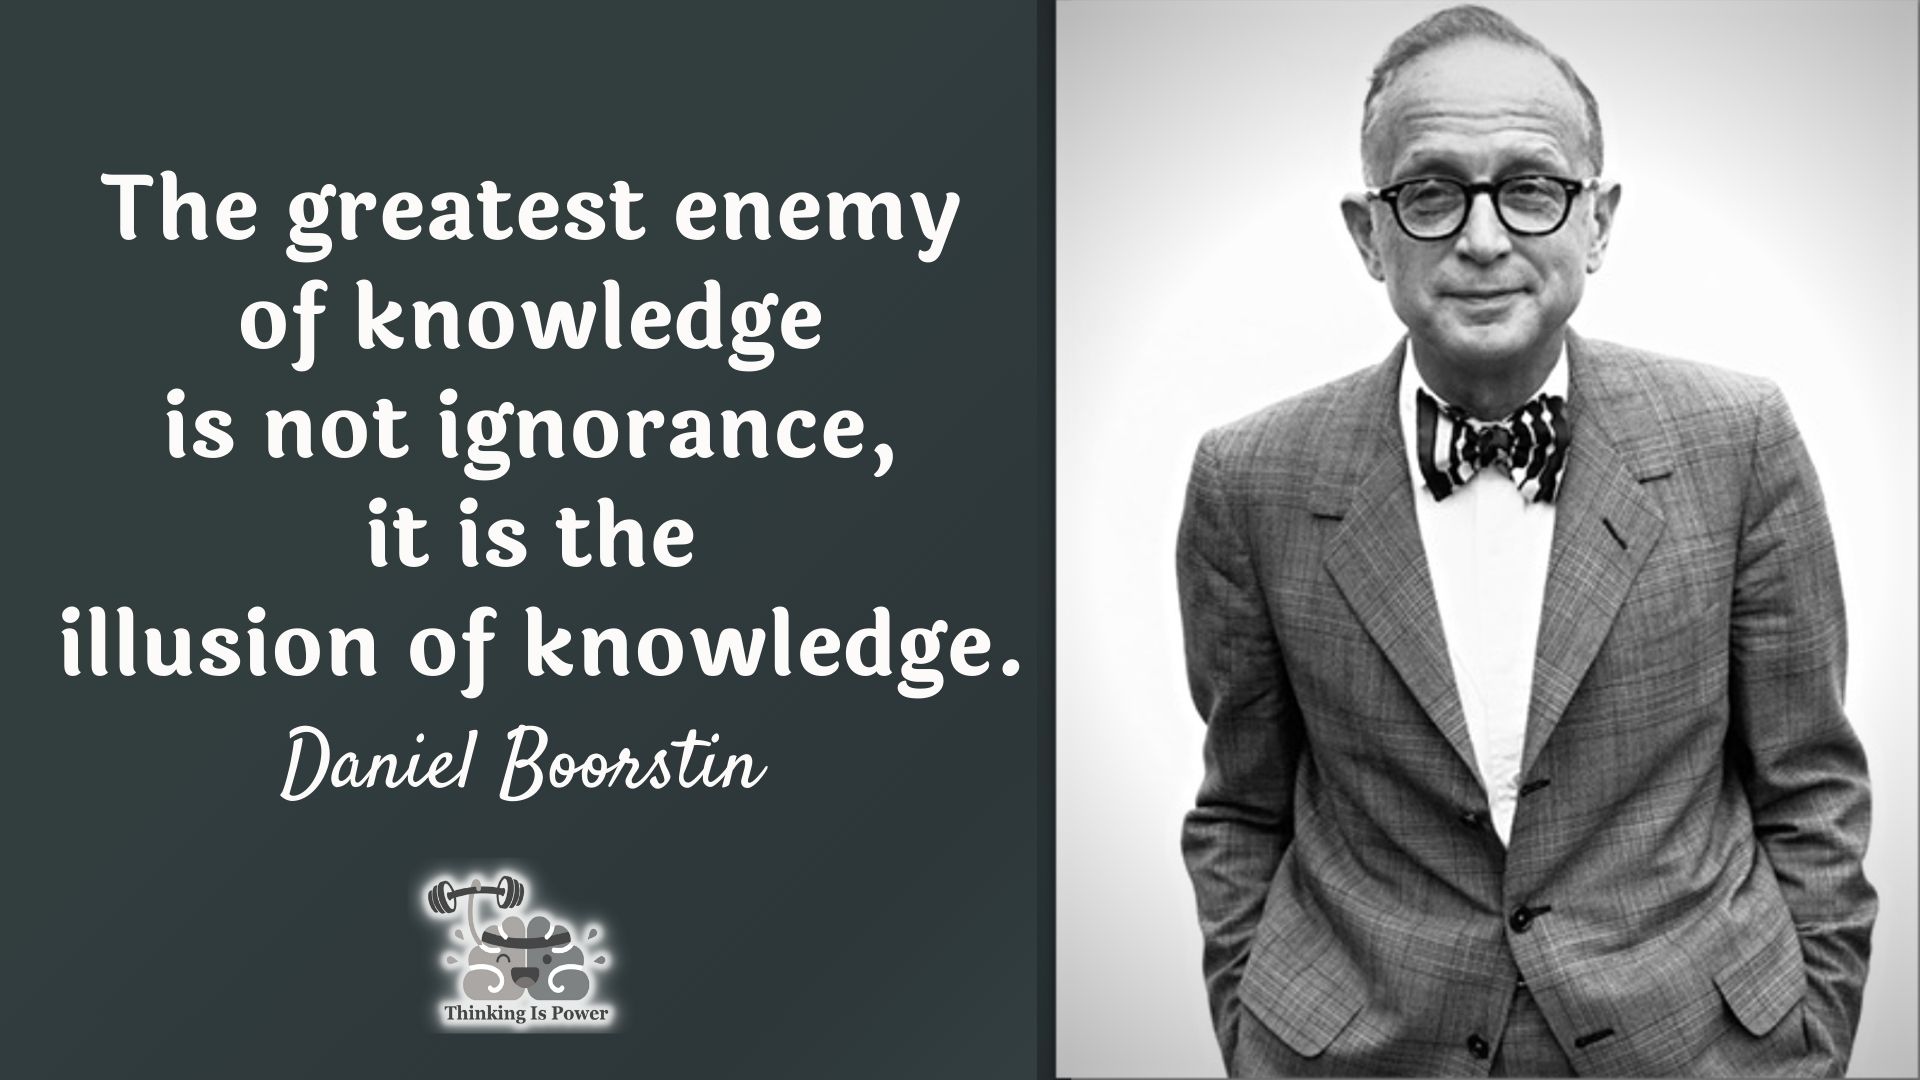 Daniel Boorstin Quote The greatest enemy of knowledge is not ignorance, it is the illusion of knowledge.